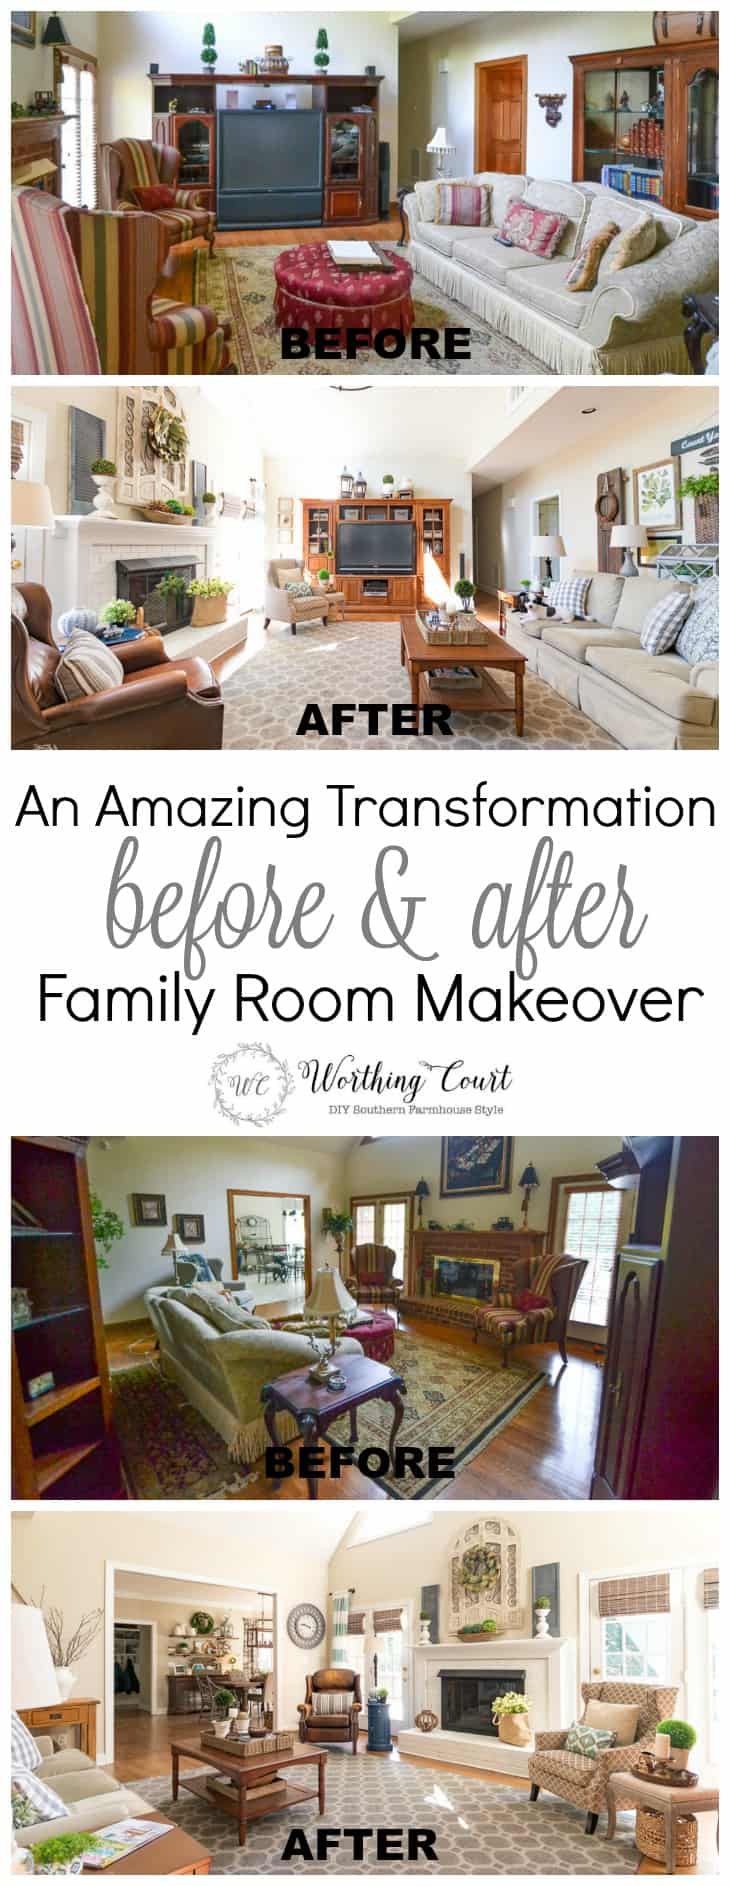 Amazing before and after family room makeover. Taken from dark and dated to bright and inviting with rustic farmhouse touches.